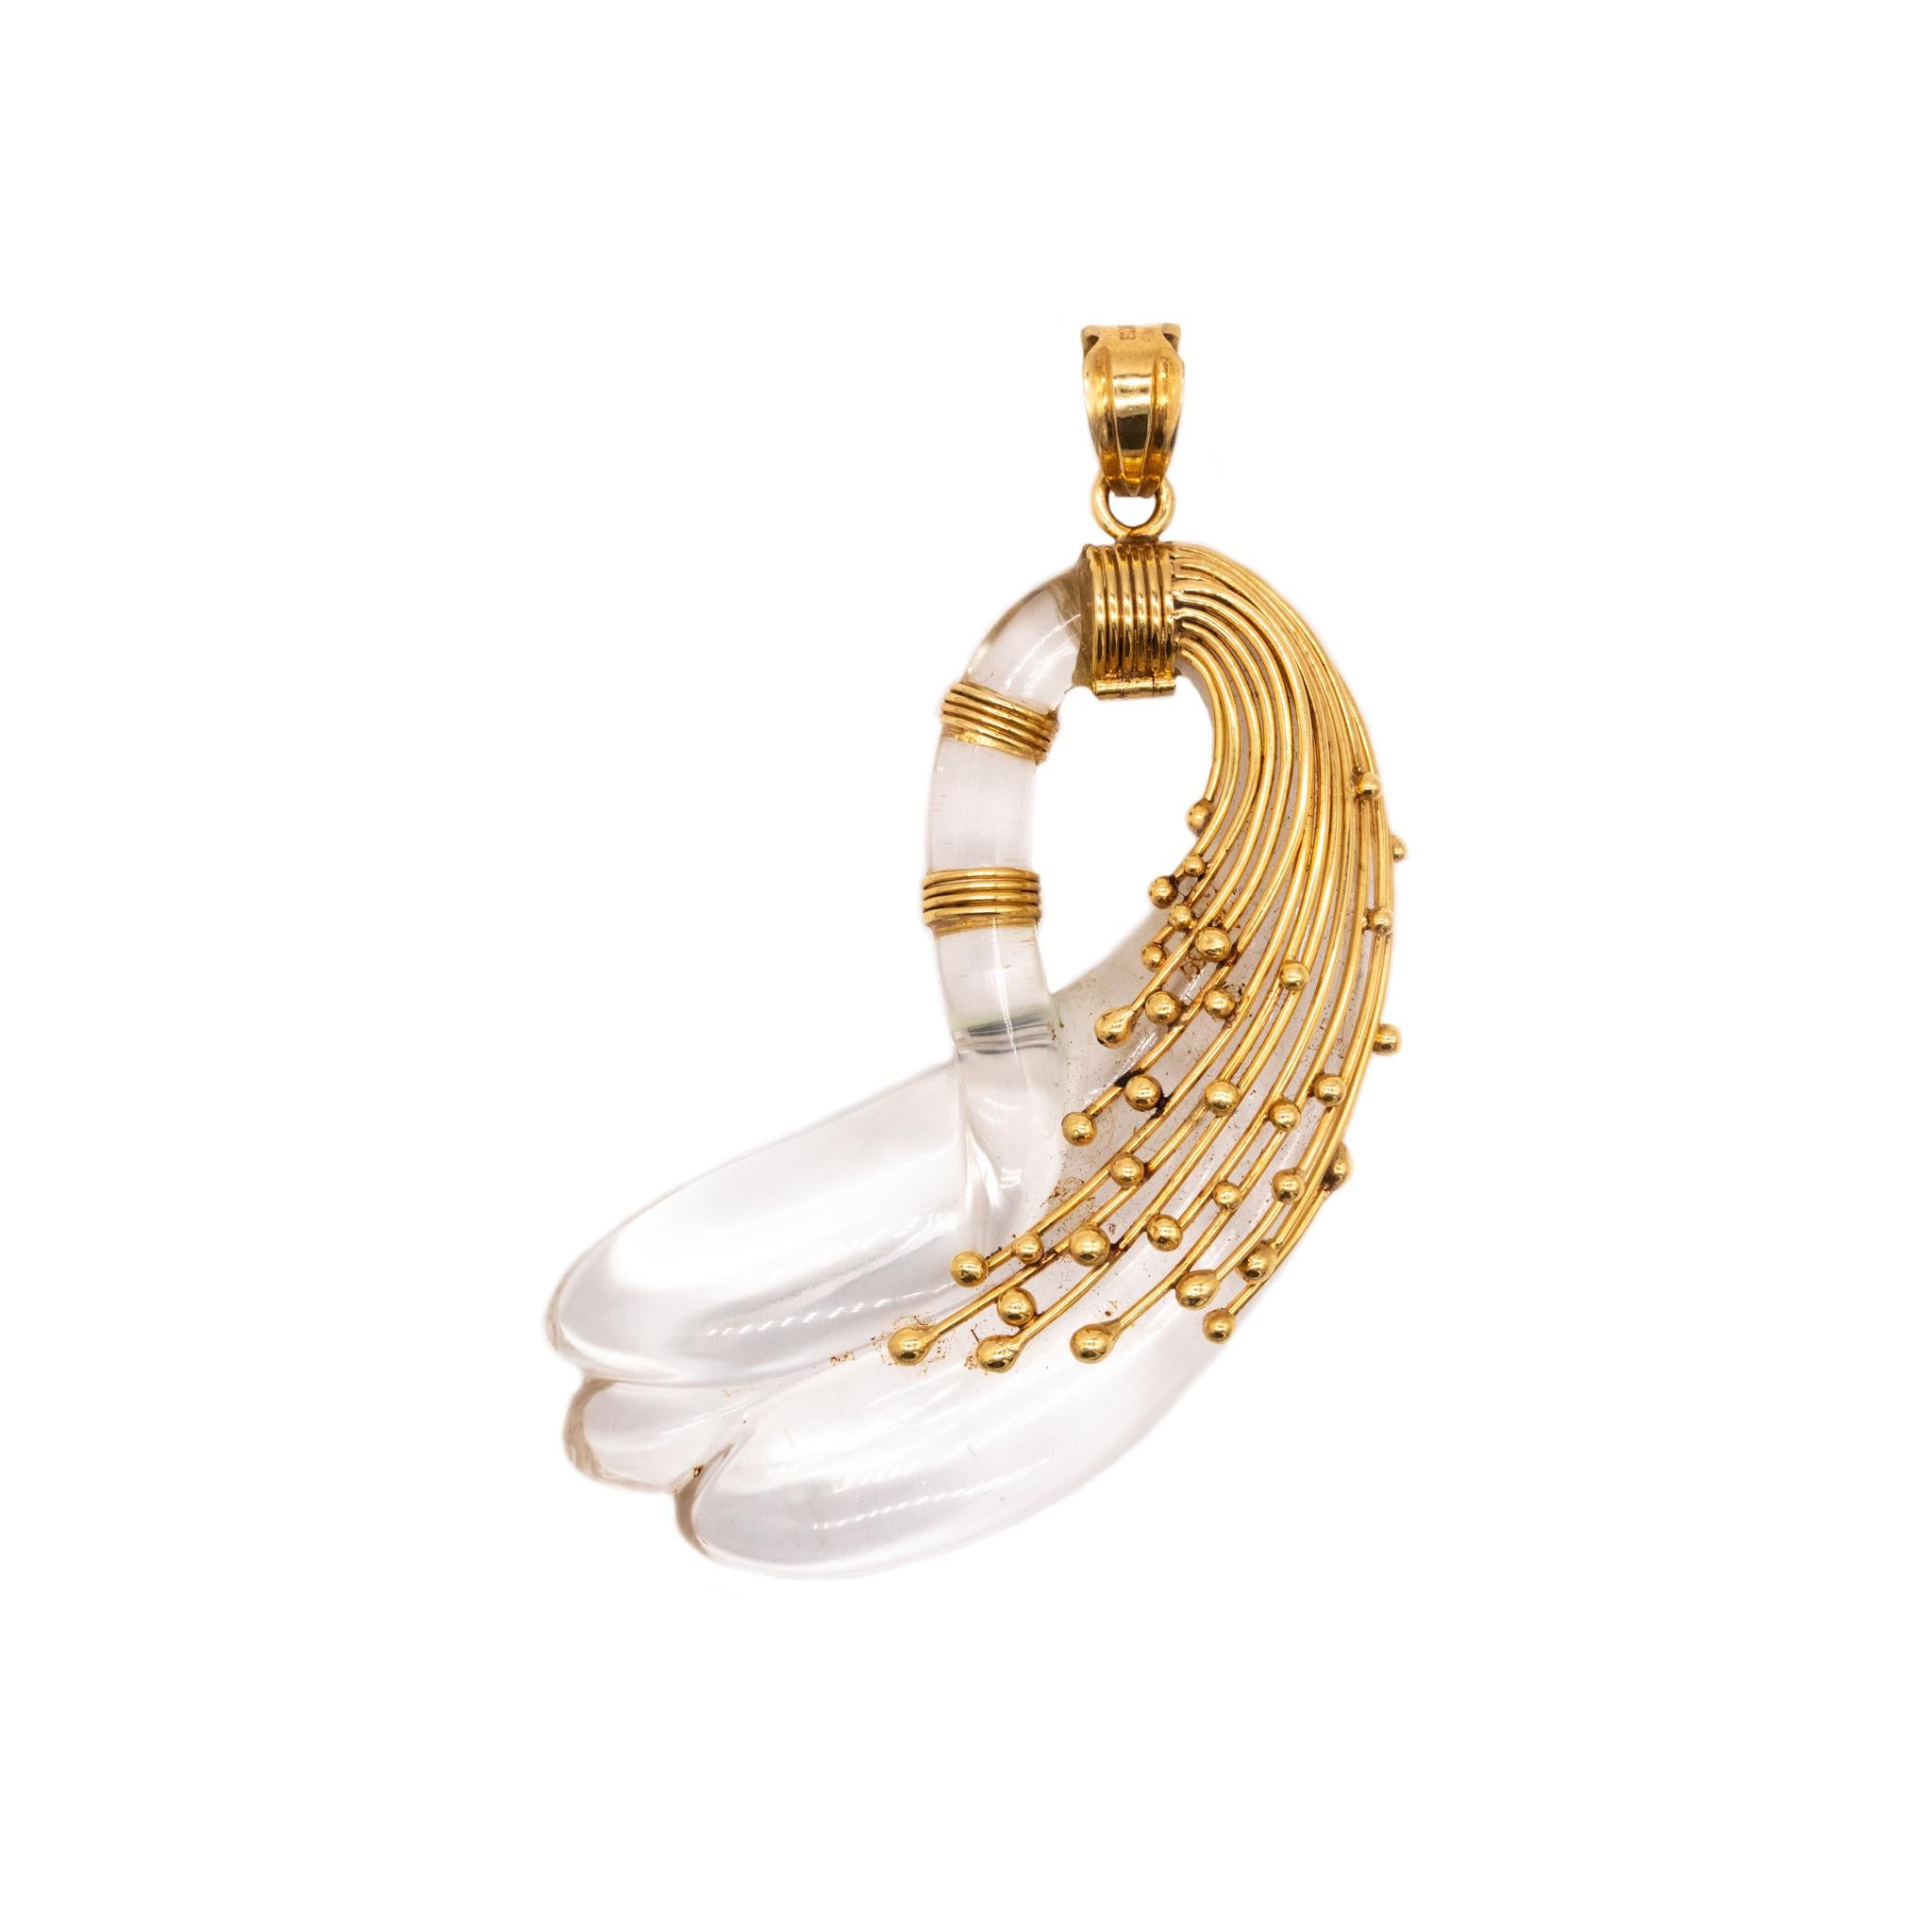 Women's or Men's Sculptural Abstraction of Swan Pendant 18Kt Yellow Gold with Carved Rock Crystal